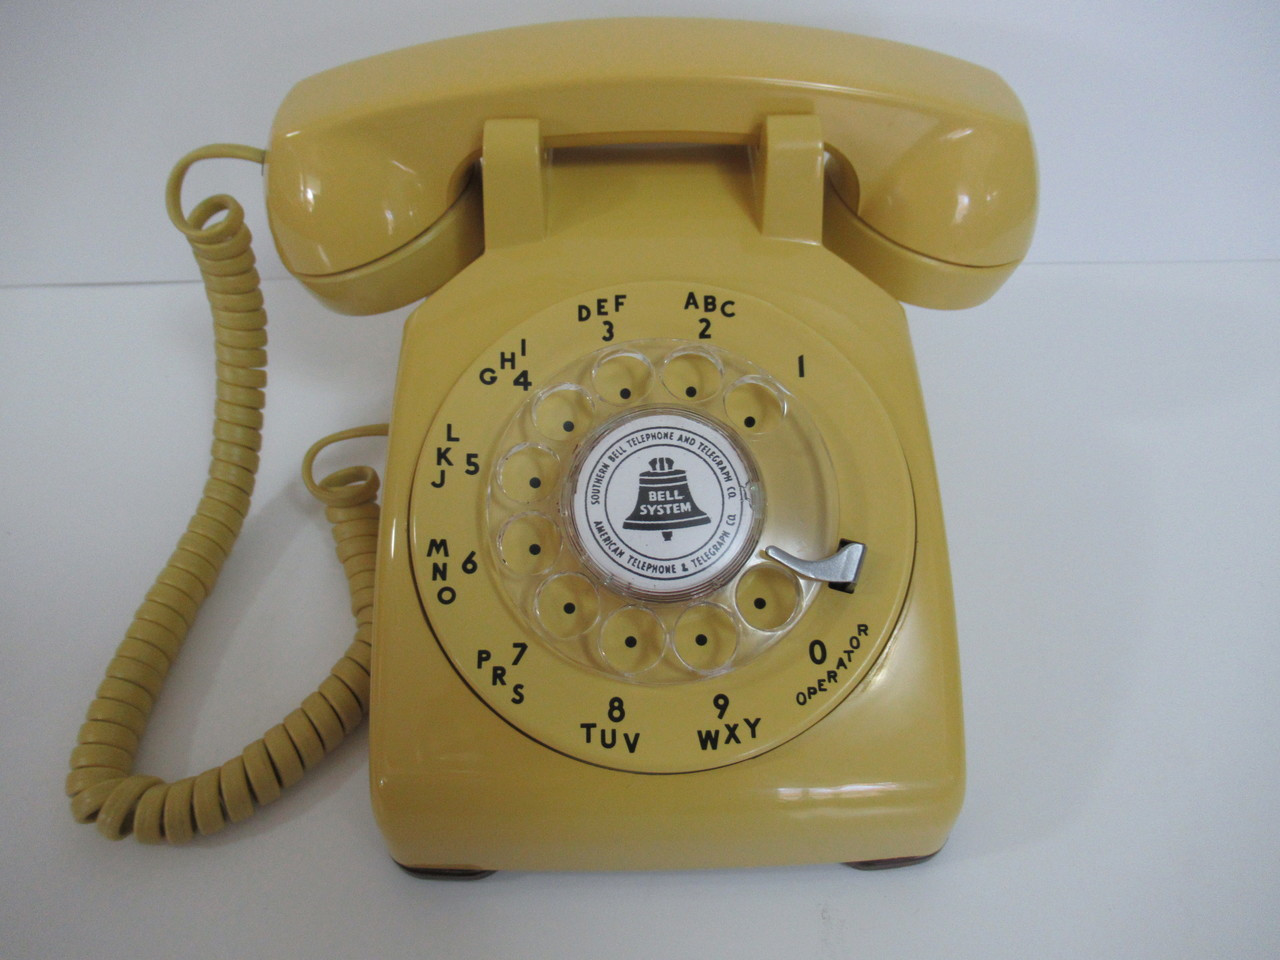 Yellow 500 Series Telephone Made By Western Electric And Restored Like New For Many Years Of Future Use Old Phone Shop